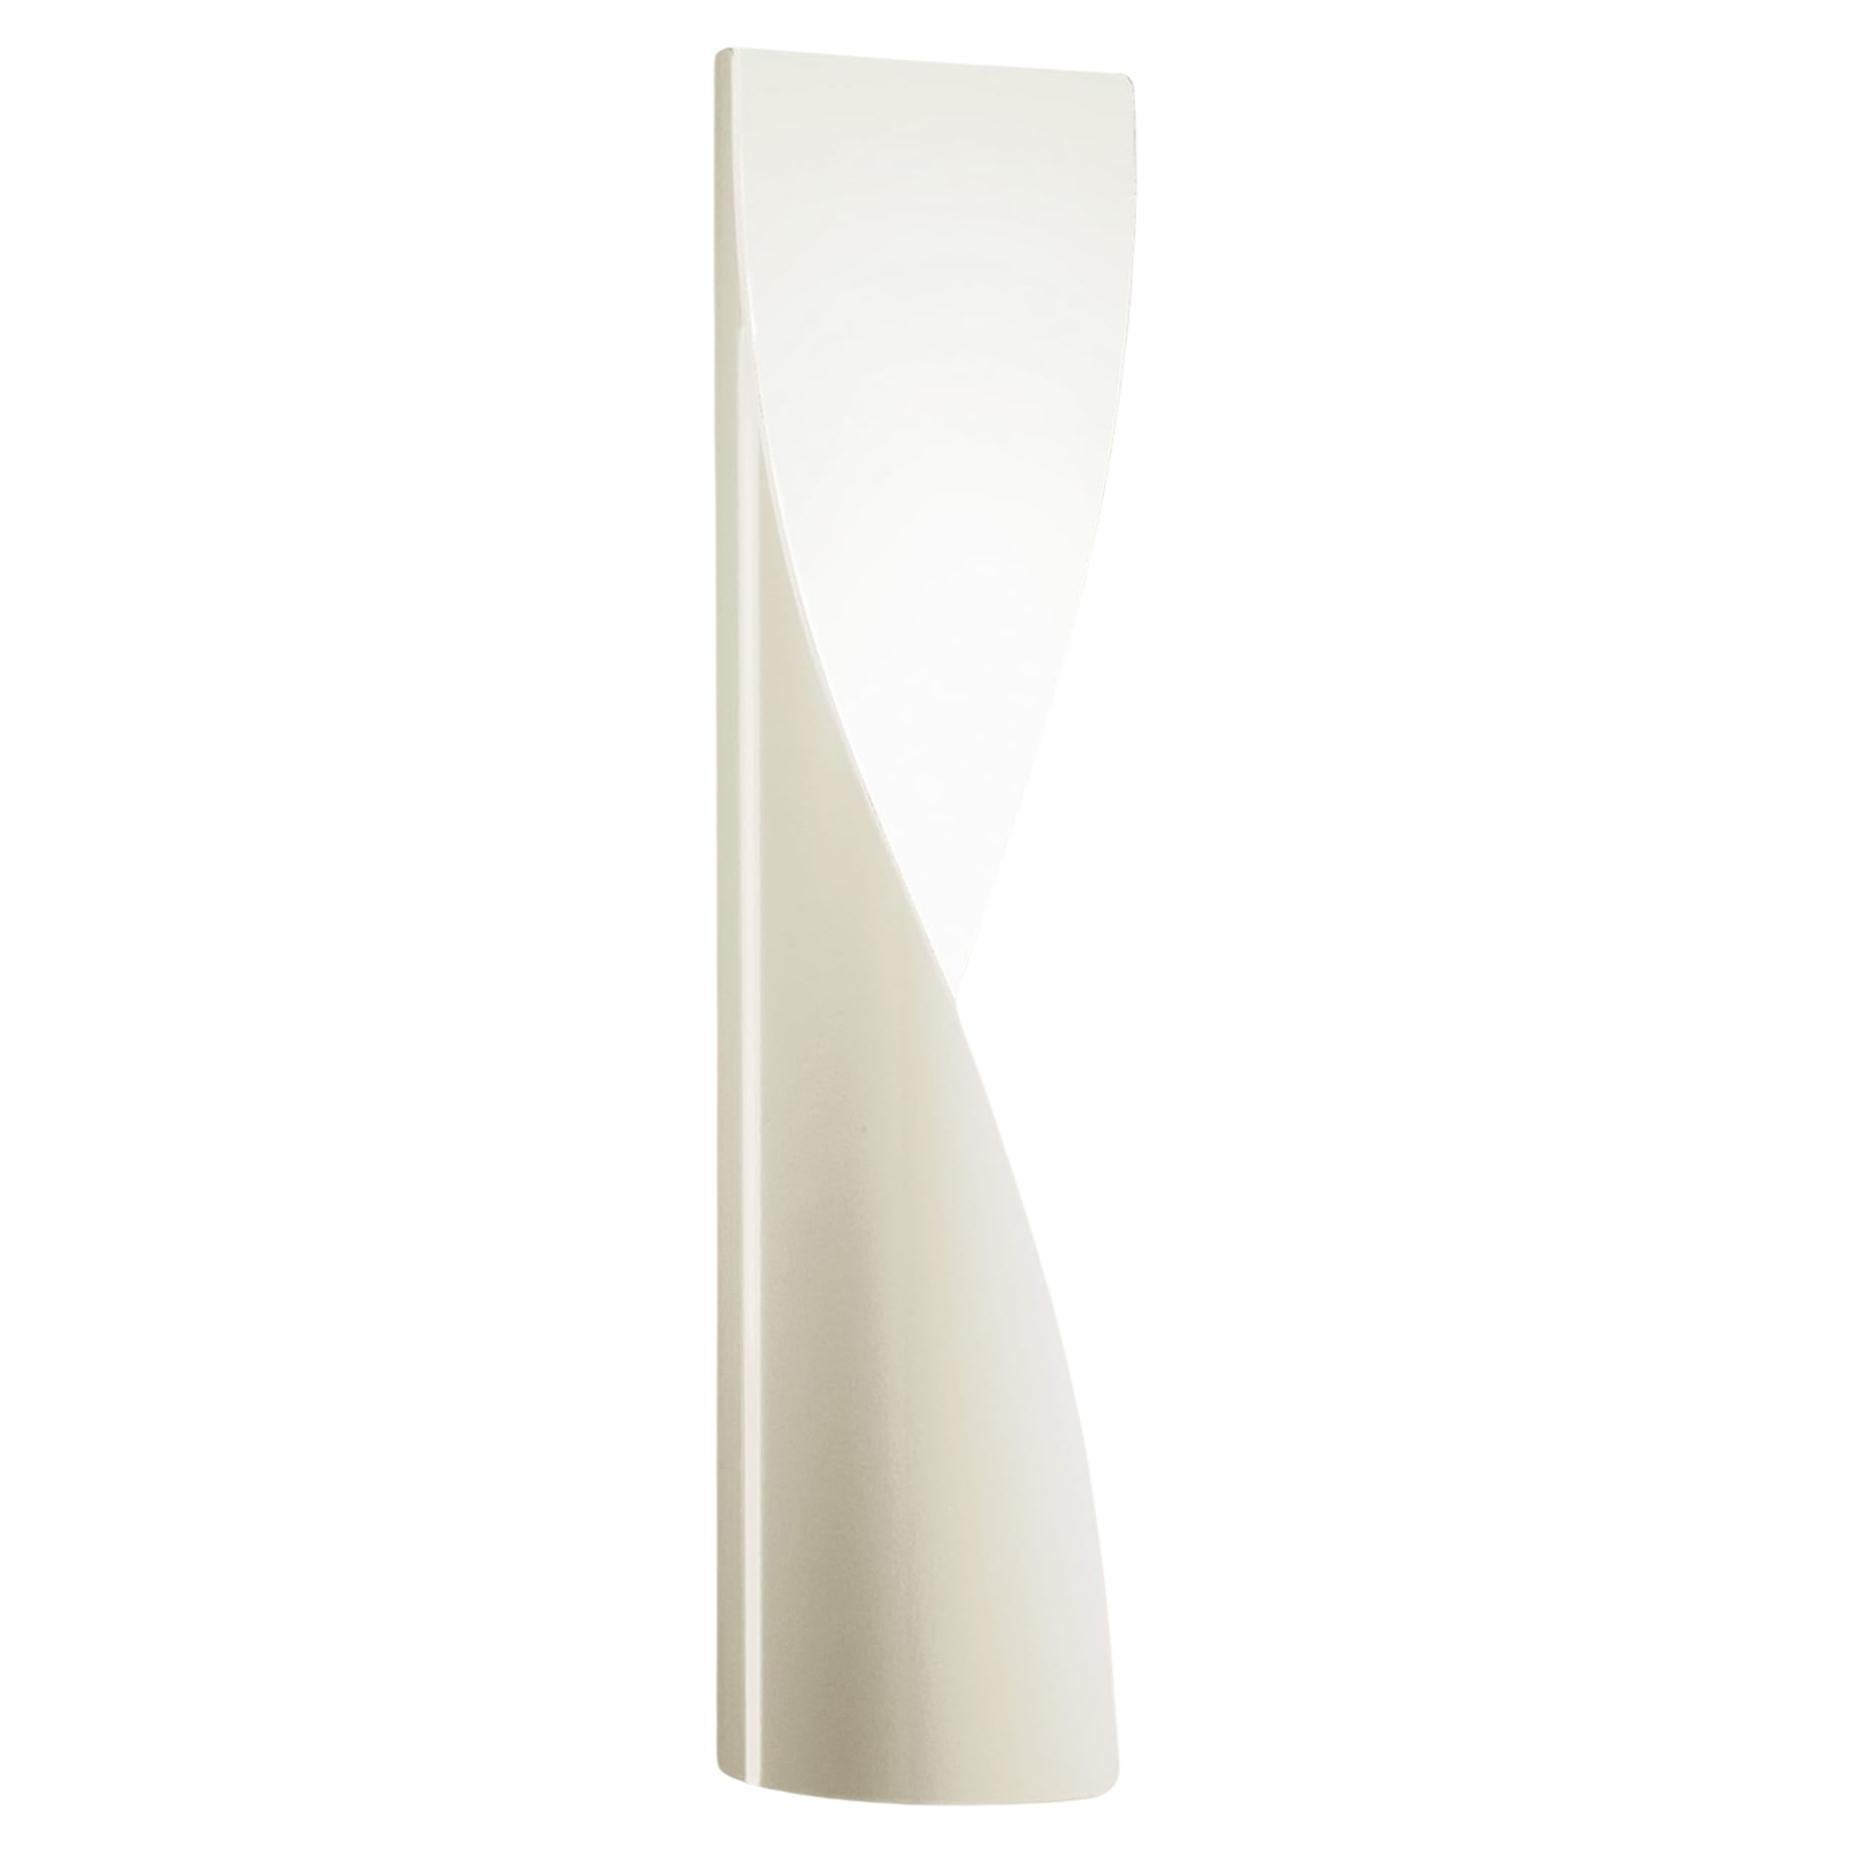 Evita White Wall Lamp #2 - US-Wired